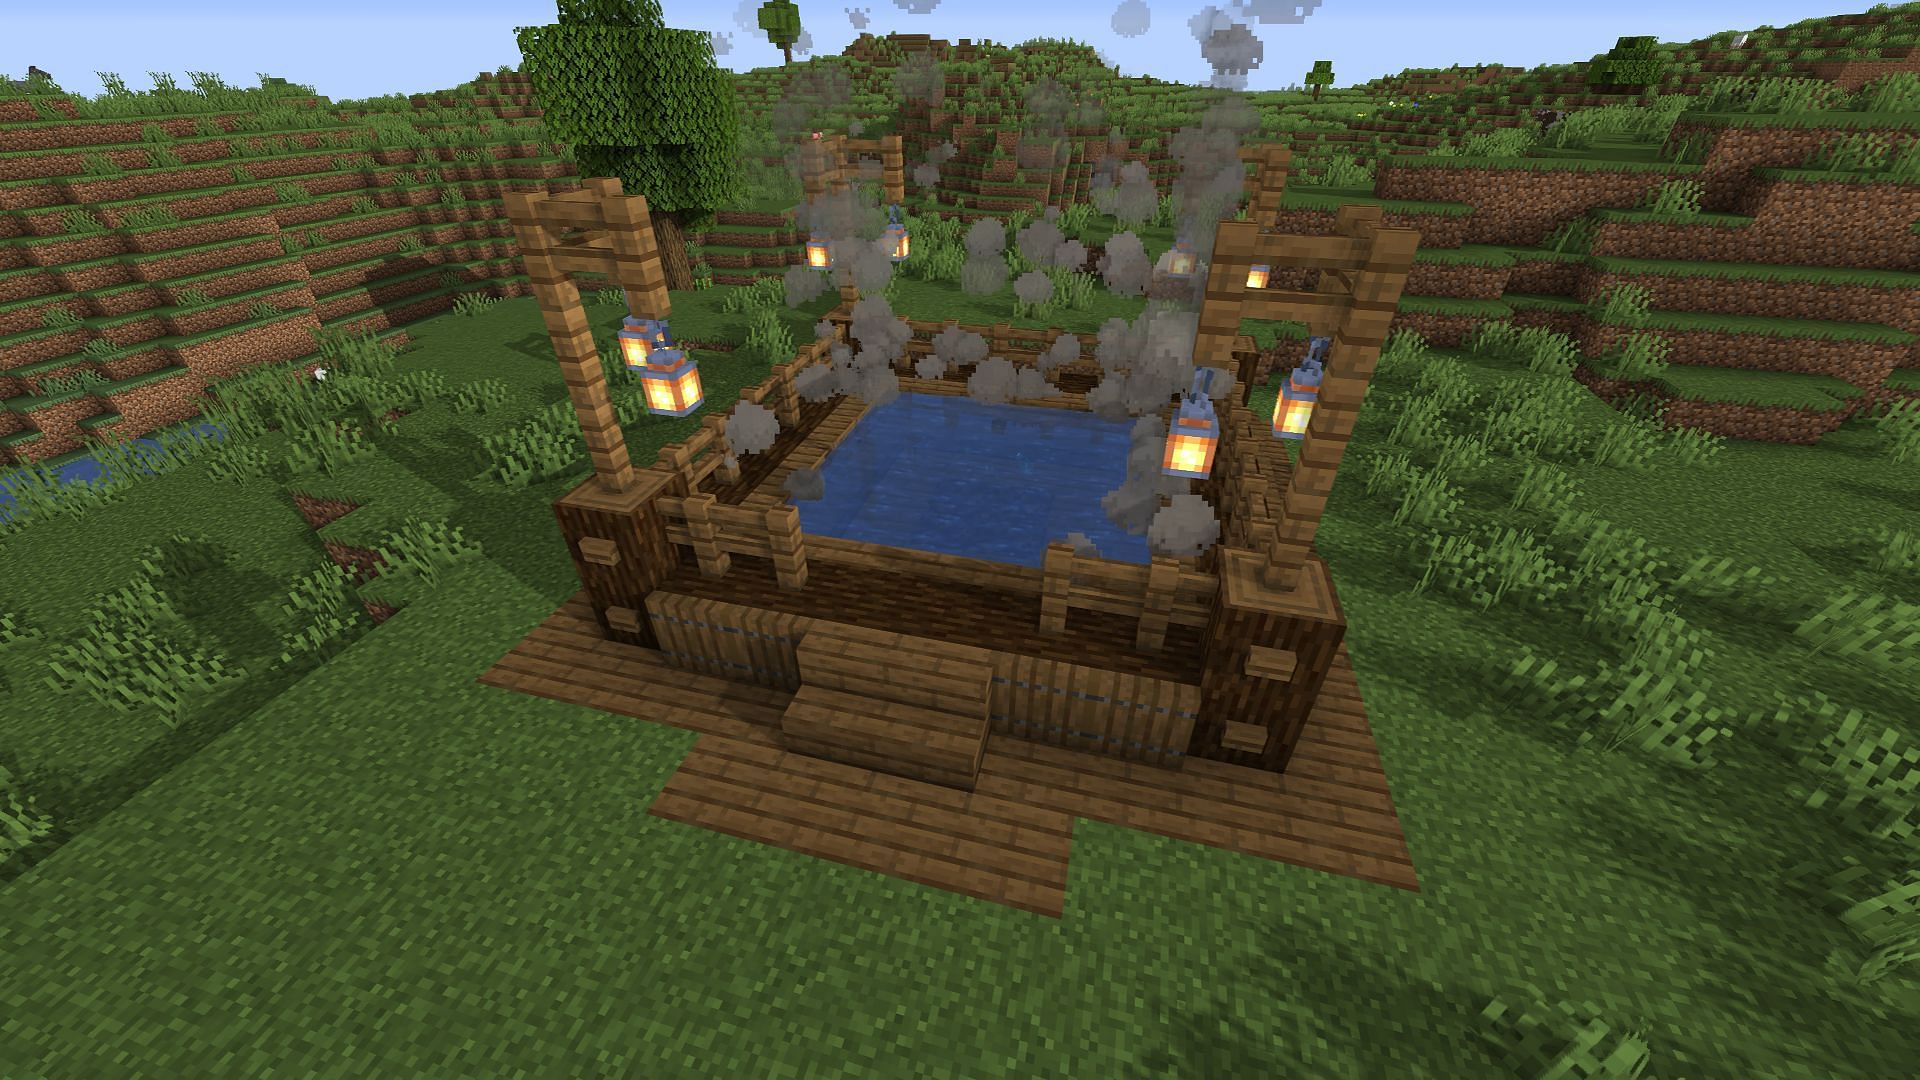 An example of an above-ground rustic style hot tub (Image via Minecraft)